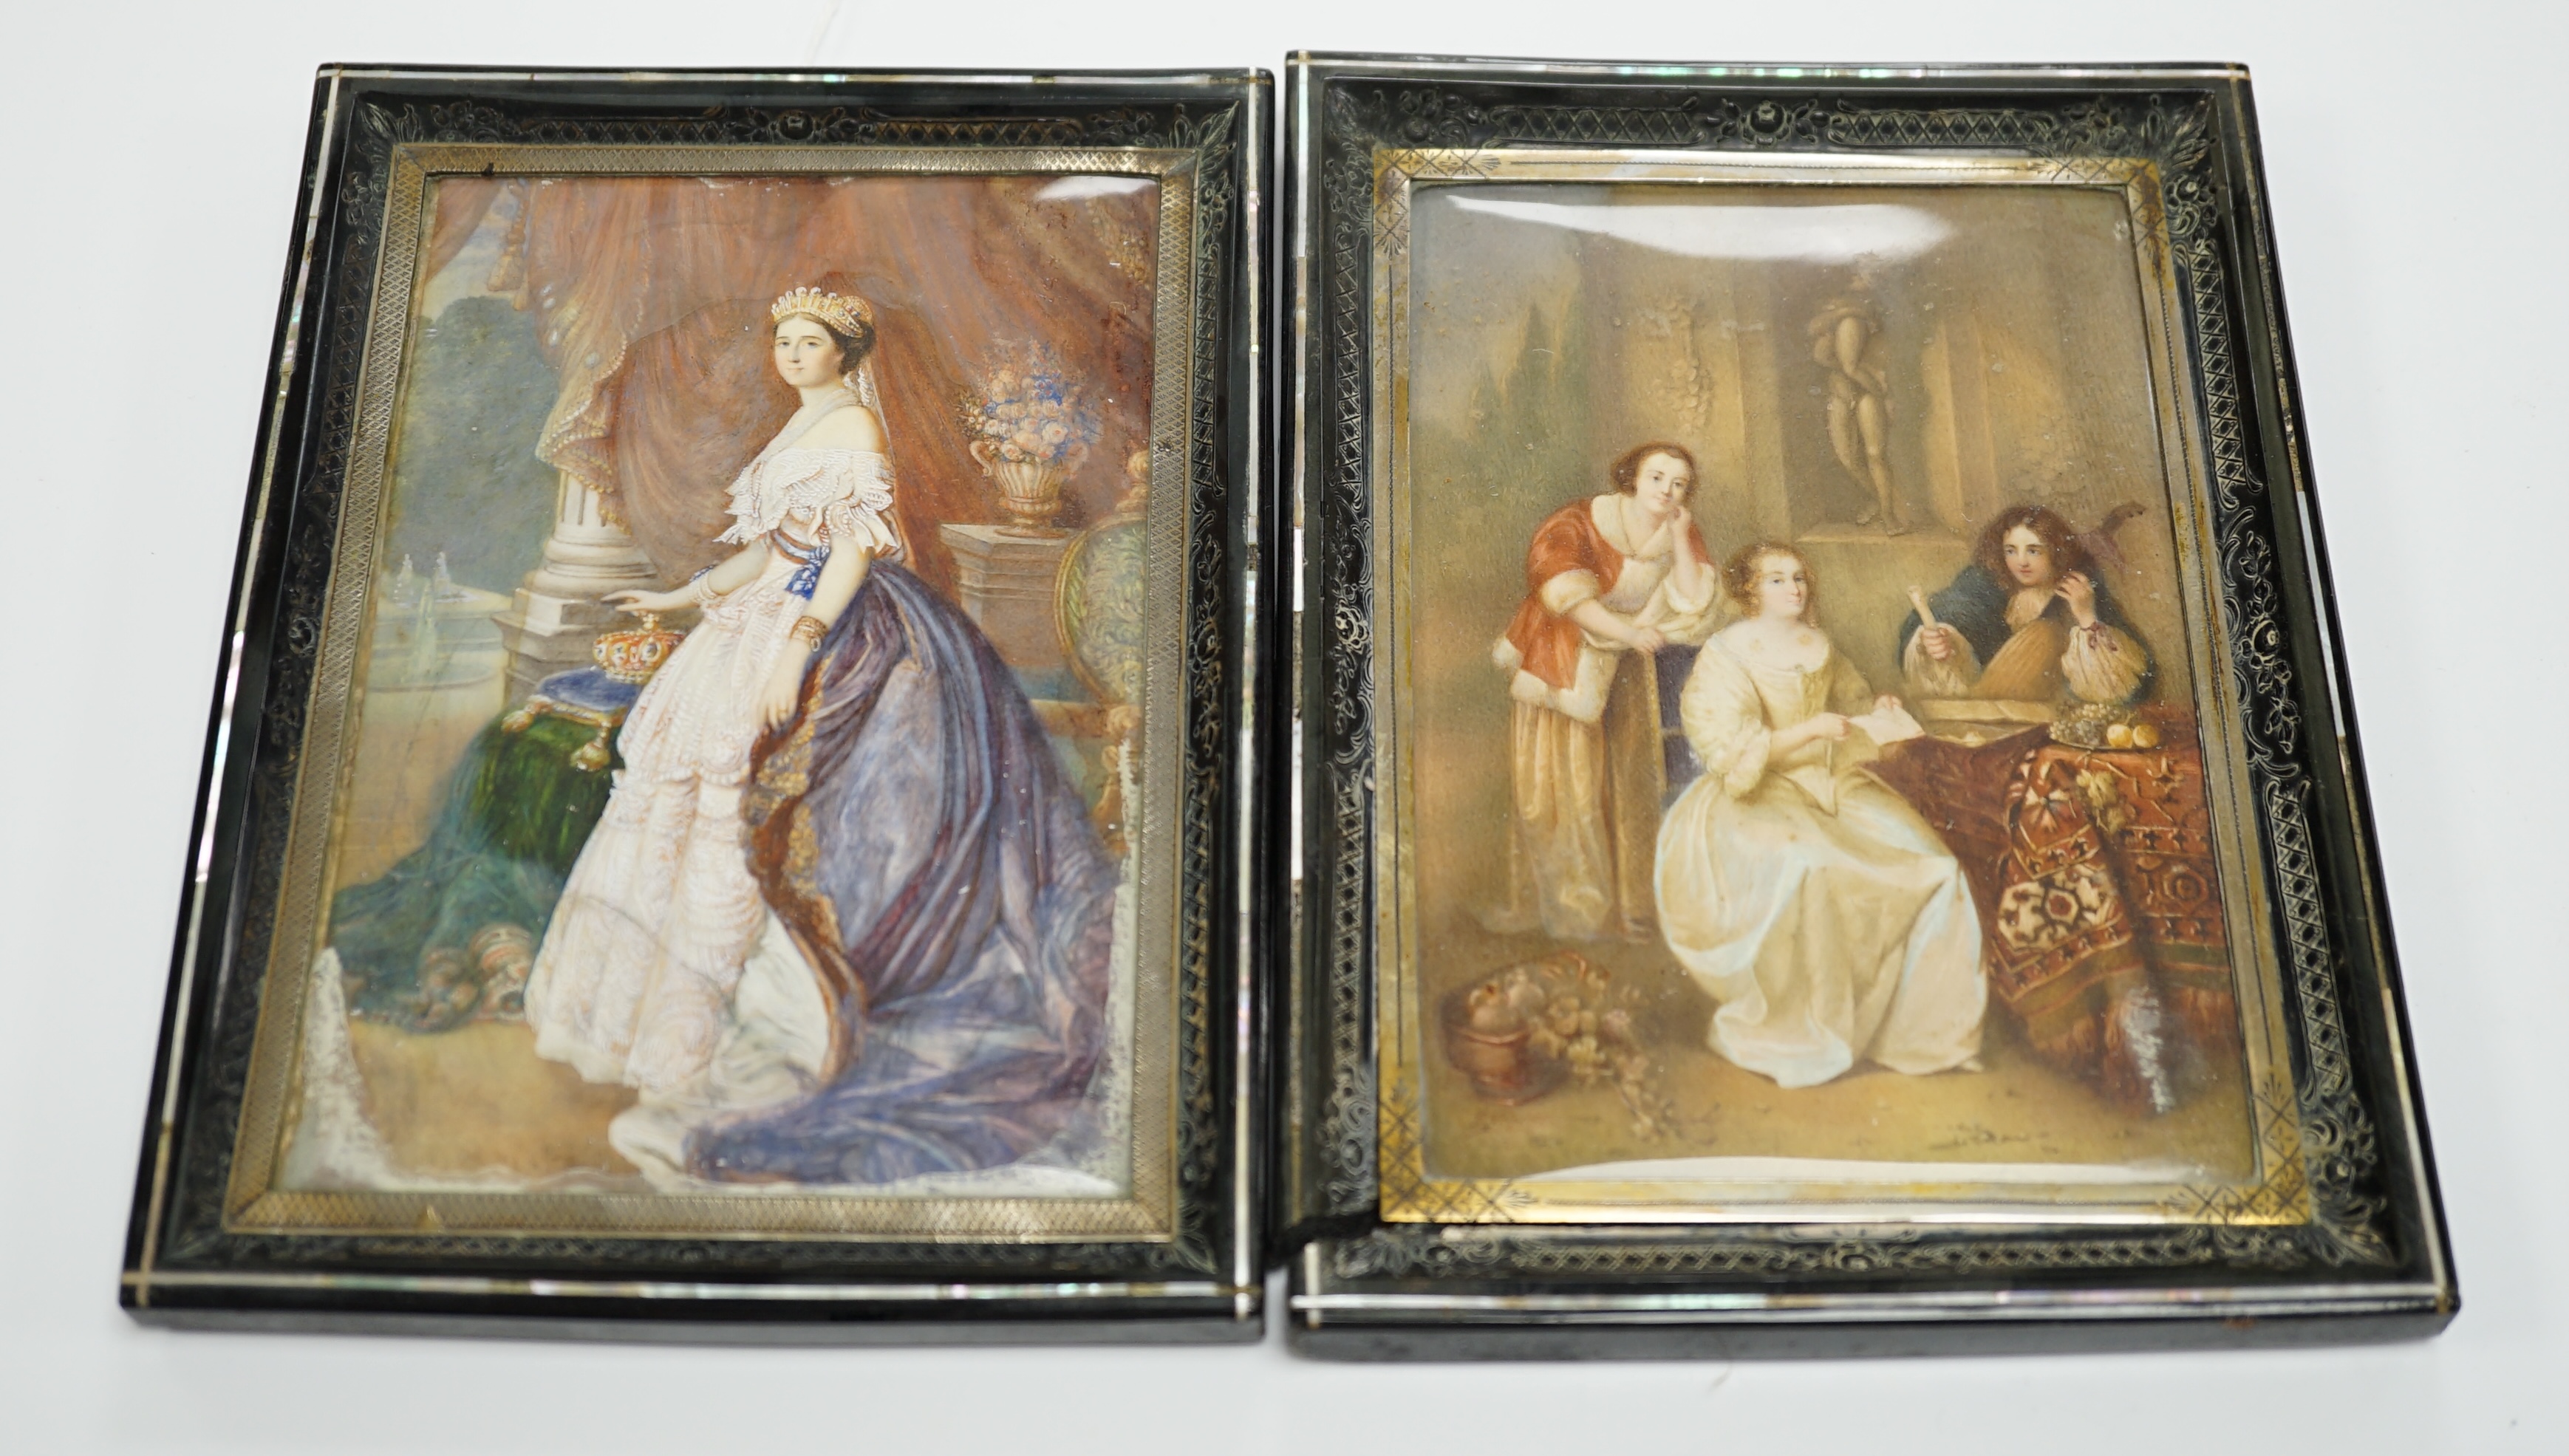 A pair of mid 19th century watercolour miniatures on ivory, Queen Victoria and three figures wearing 17th century dress, housed in inlaid and ebonised frames, 13 x 9cm CITES Submission reference 644V5FRS